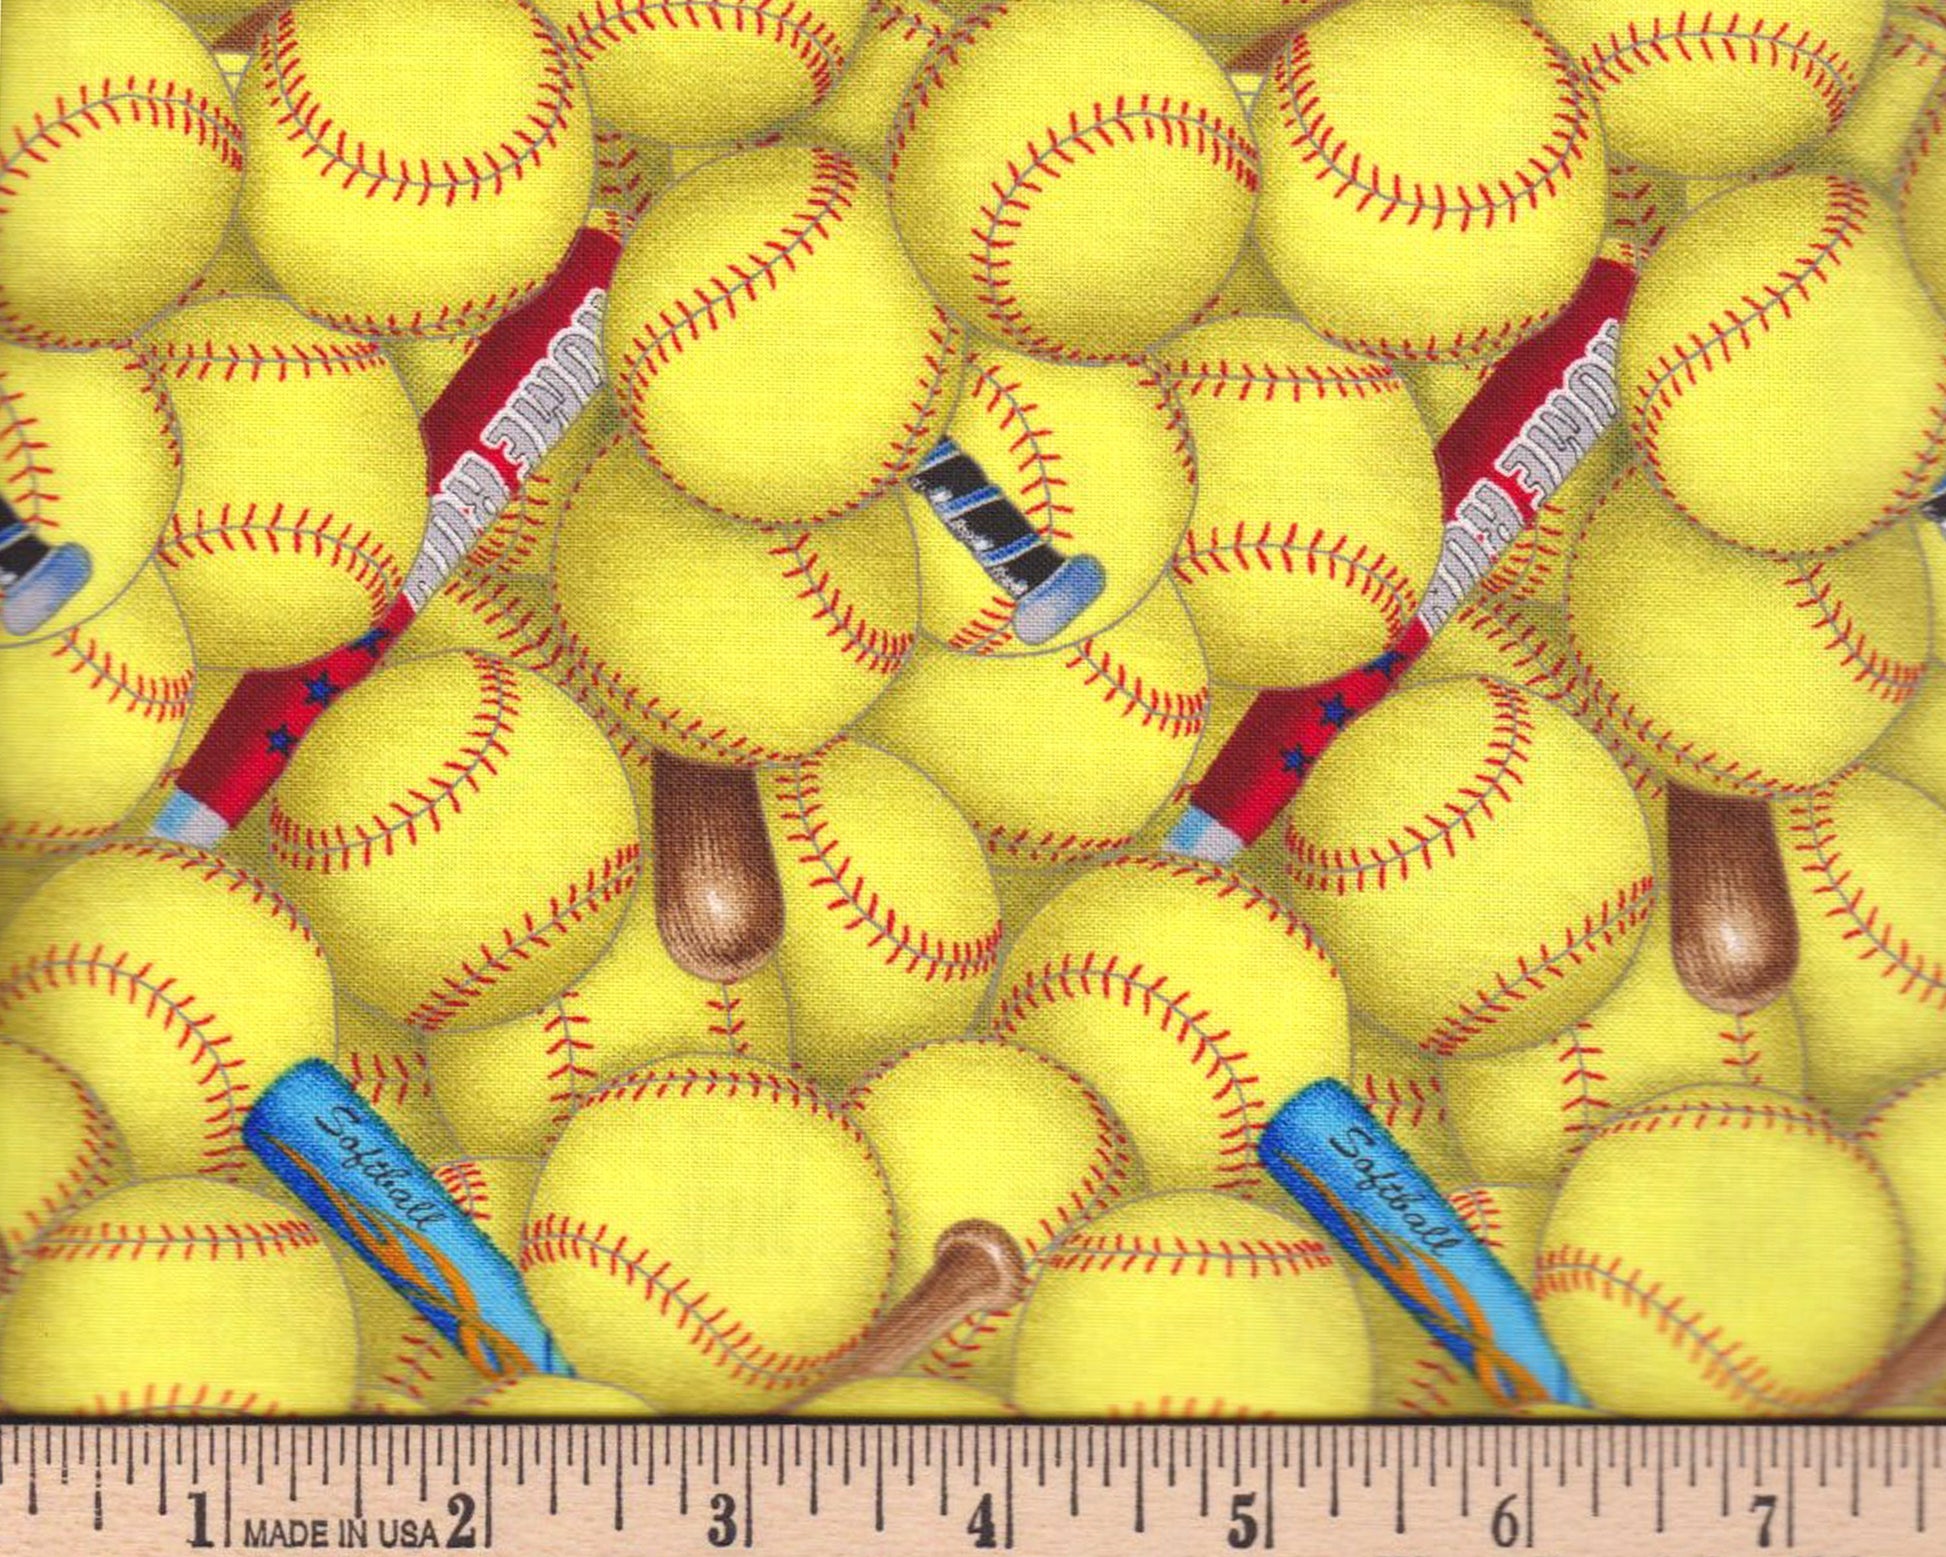 Softball fabric by the yard - Sports Collection - 100% Cotton Fabric from Elizabeth's Studio - SHIPS NEXT DAY